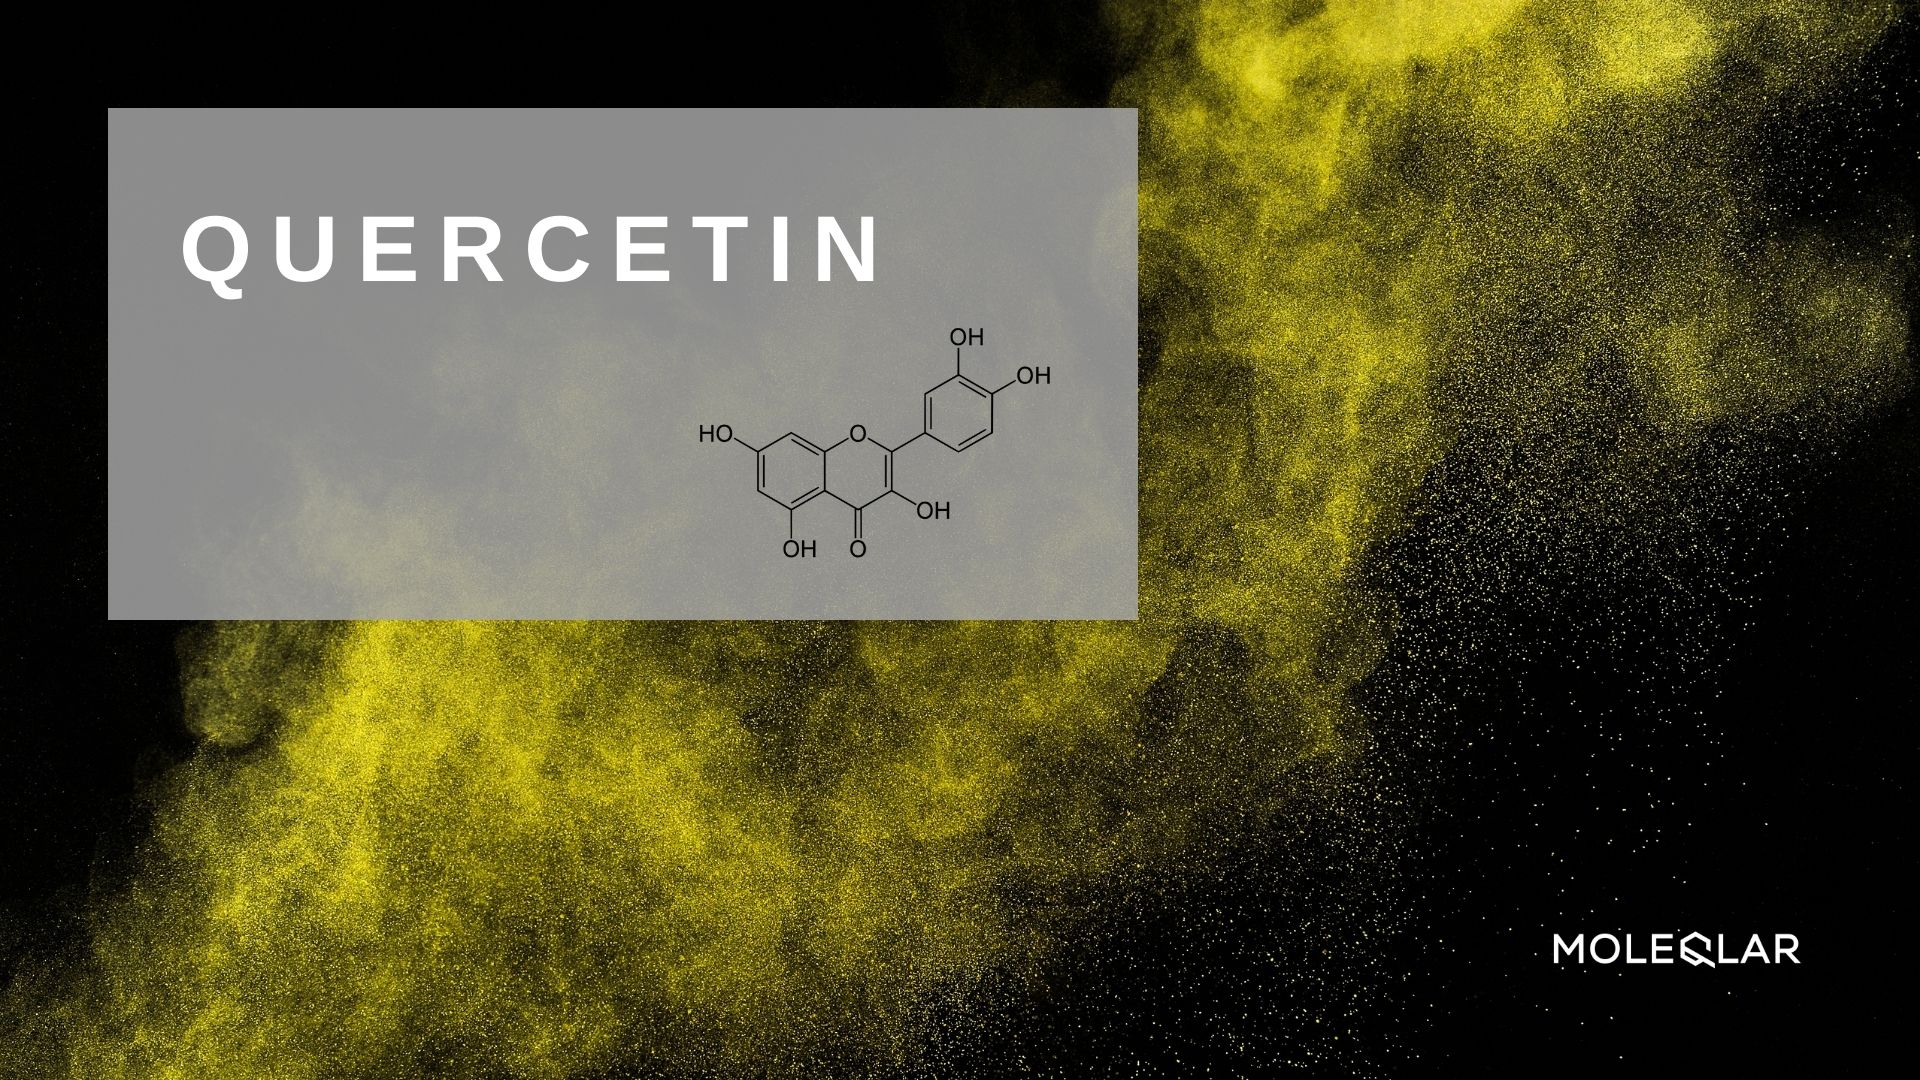 Whatis Quercetin Article image